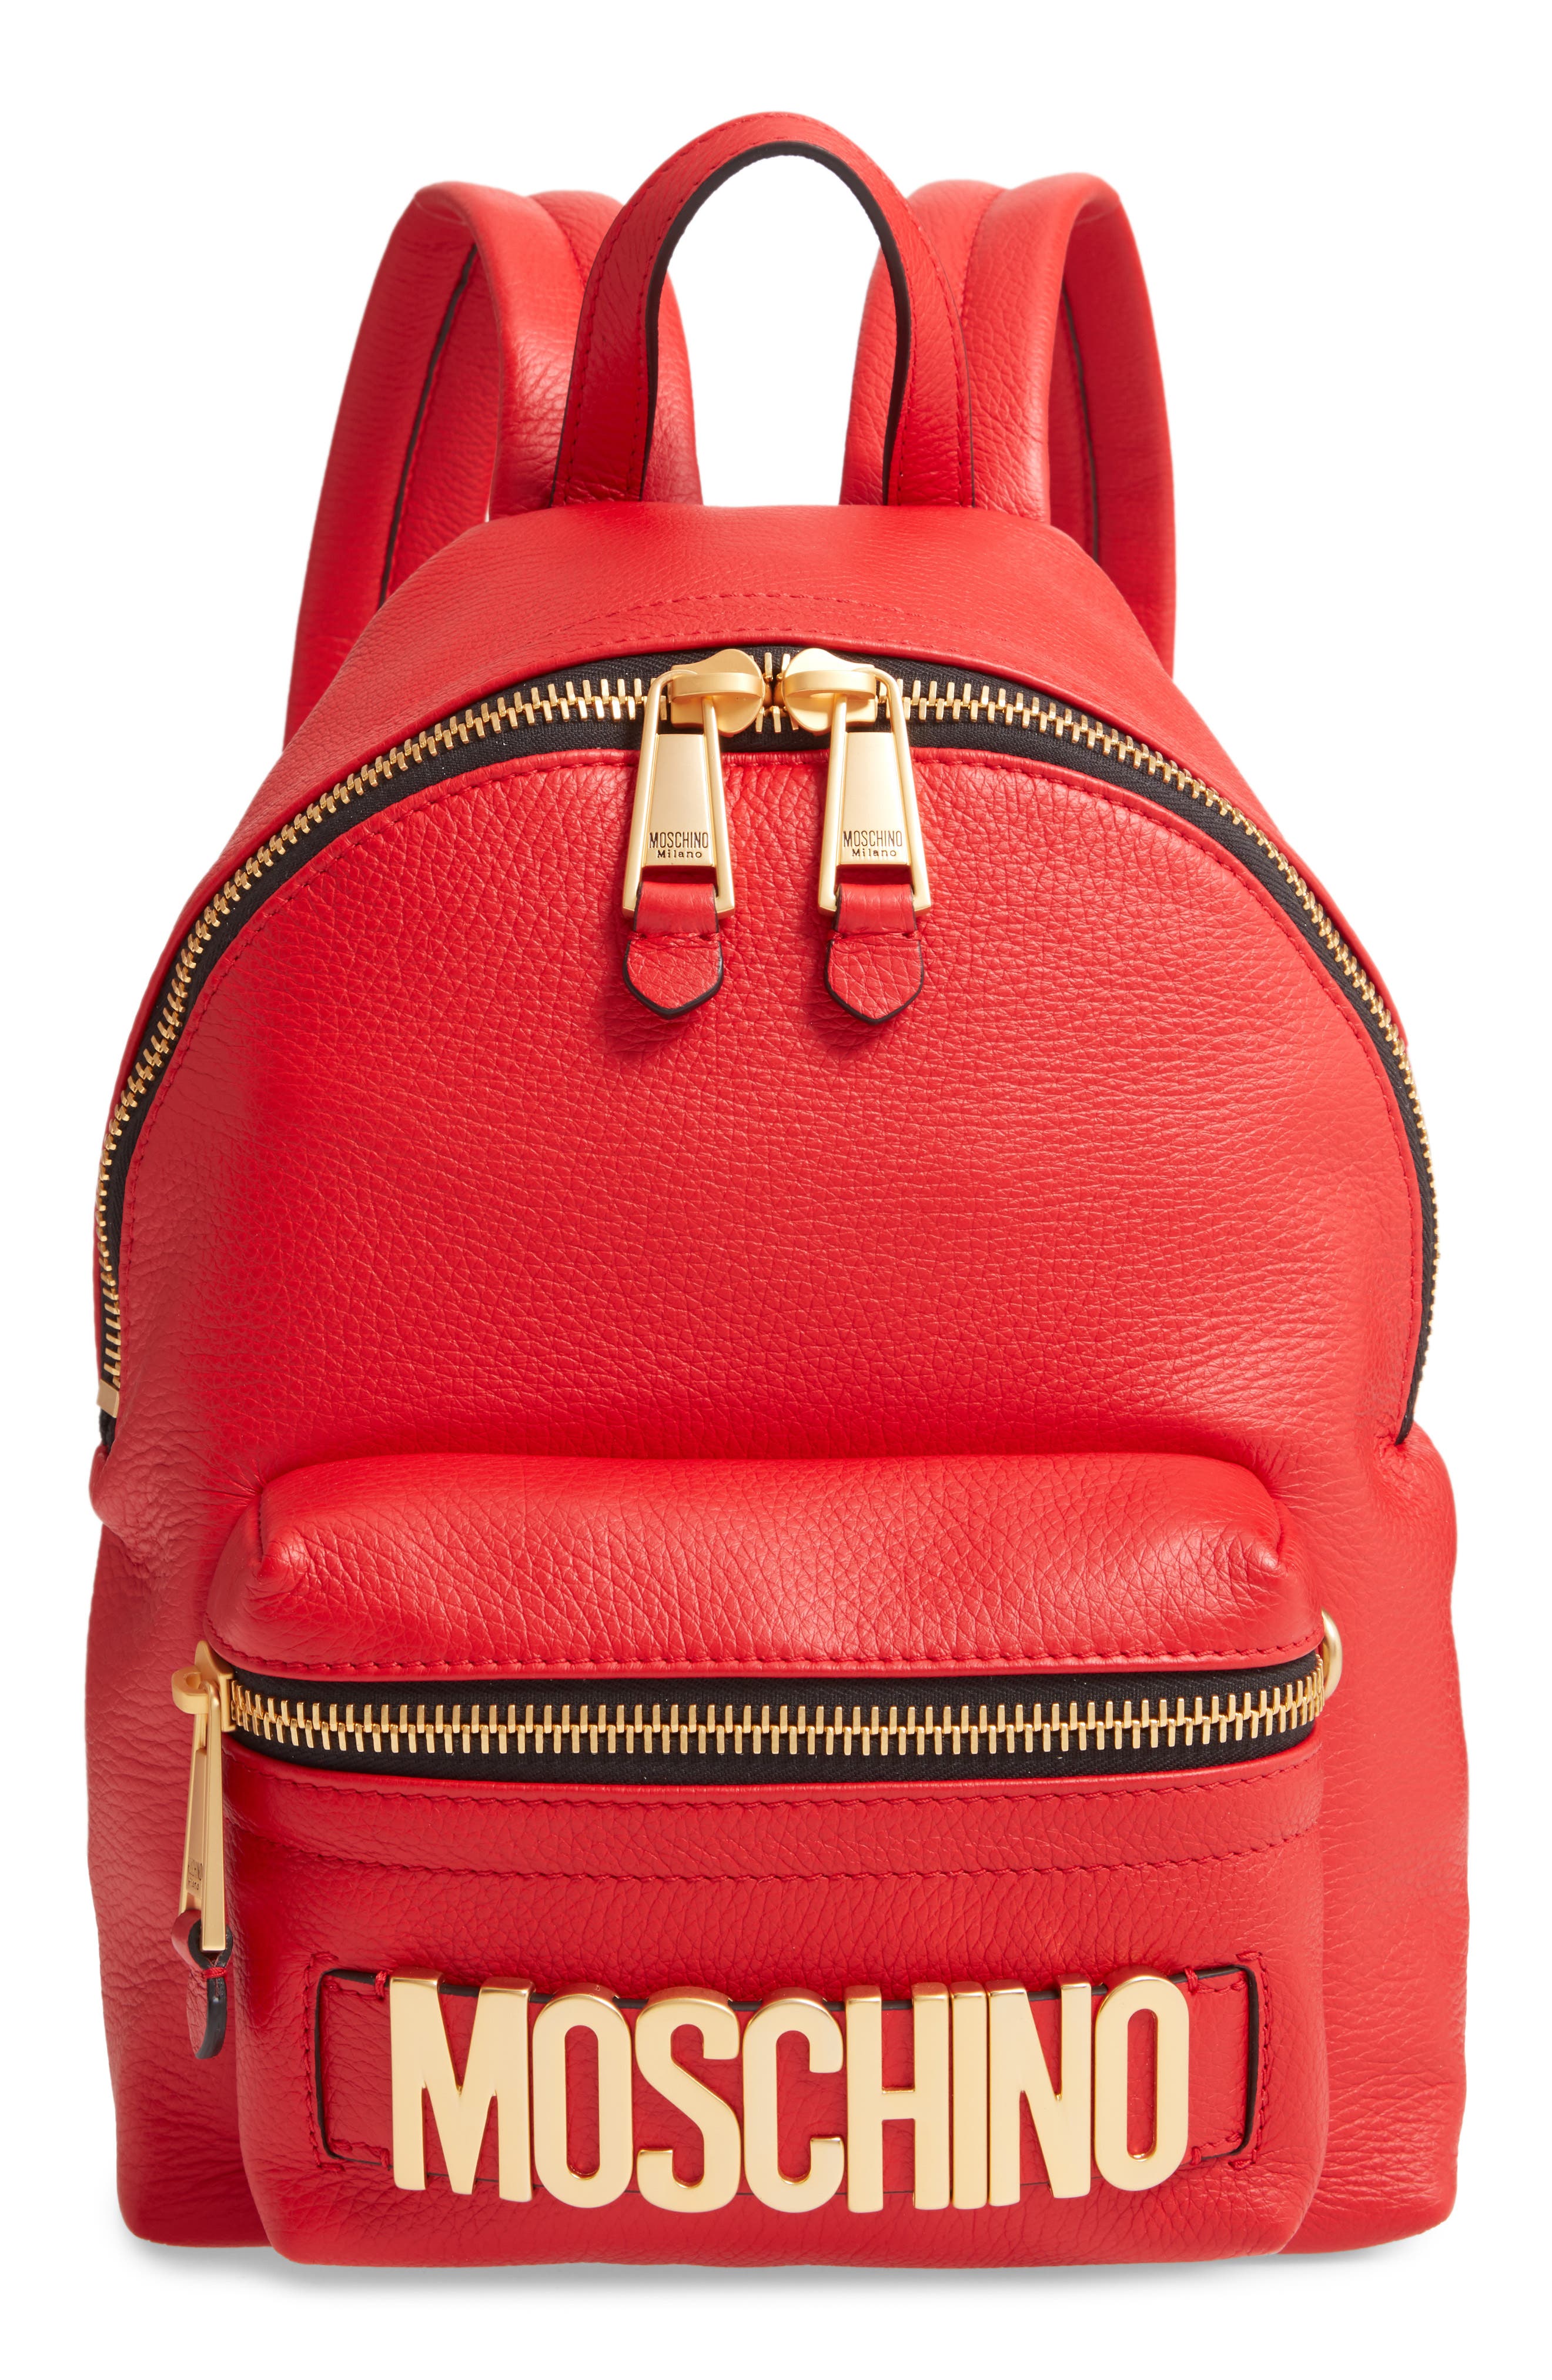 moschino backpack leather